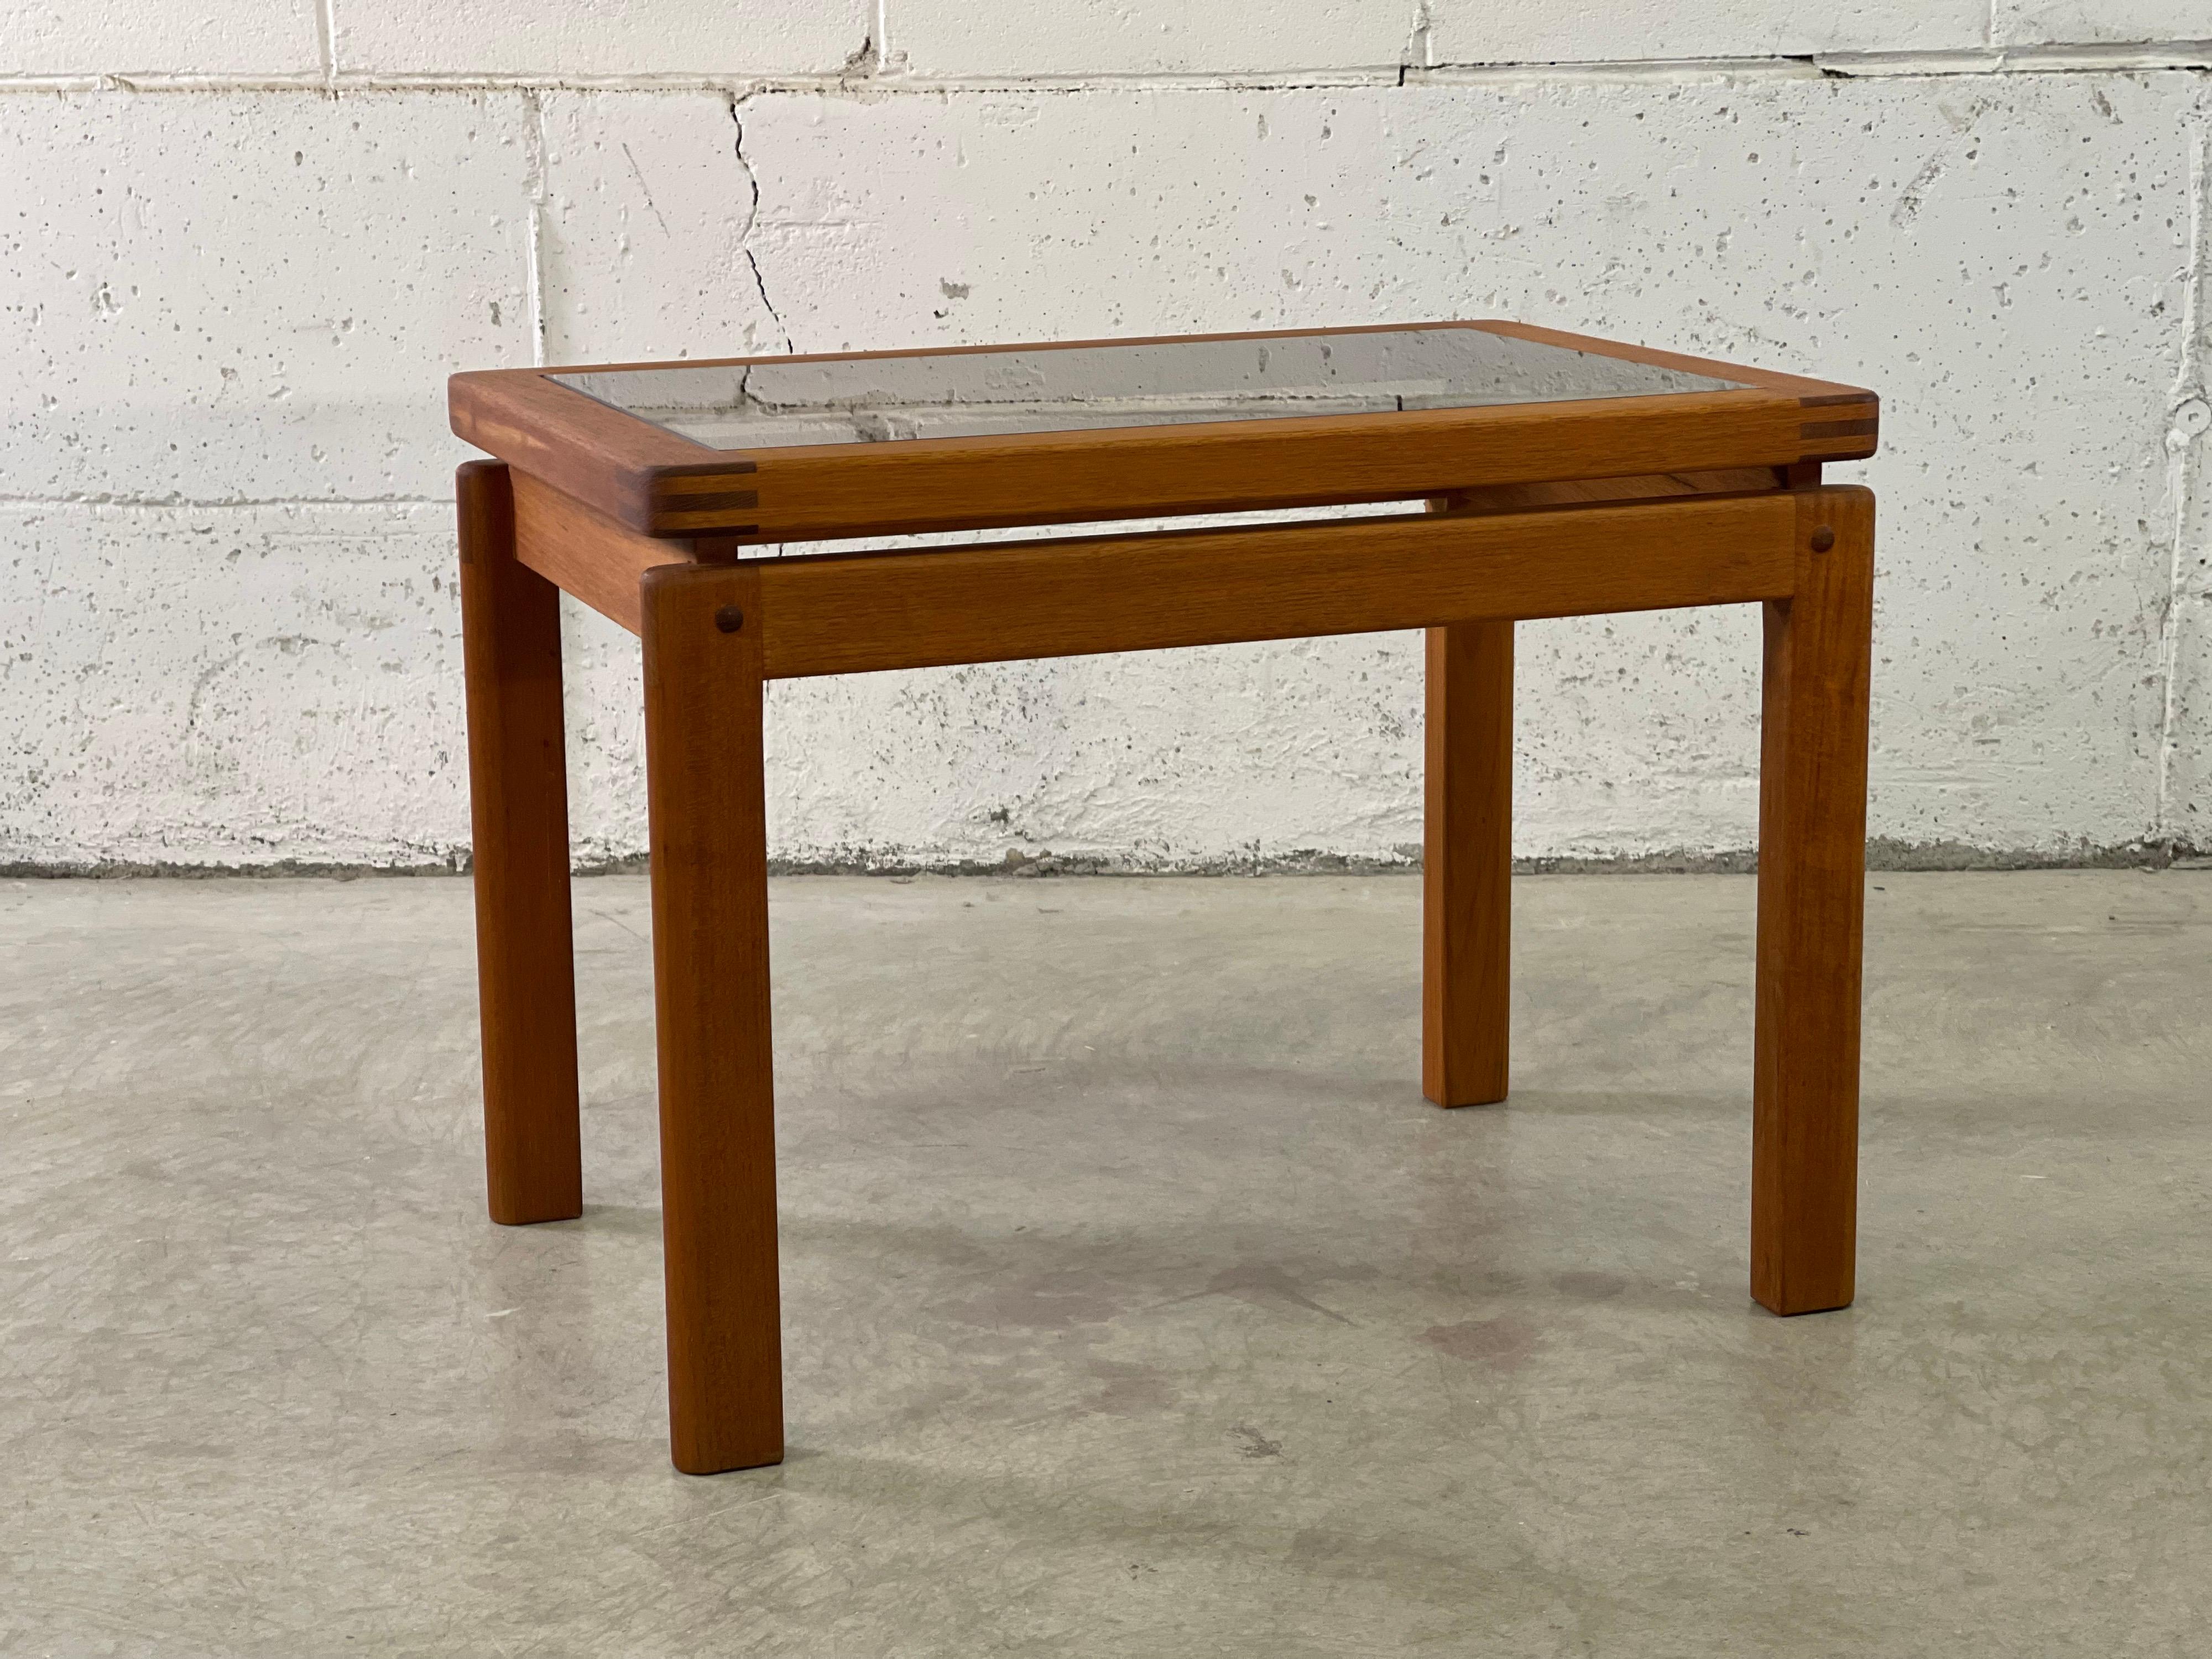 Vintage 1970s Danish teak rectangular side table with a smoked glass top. Nice exposed dovetailed joints. Marked underneath.